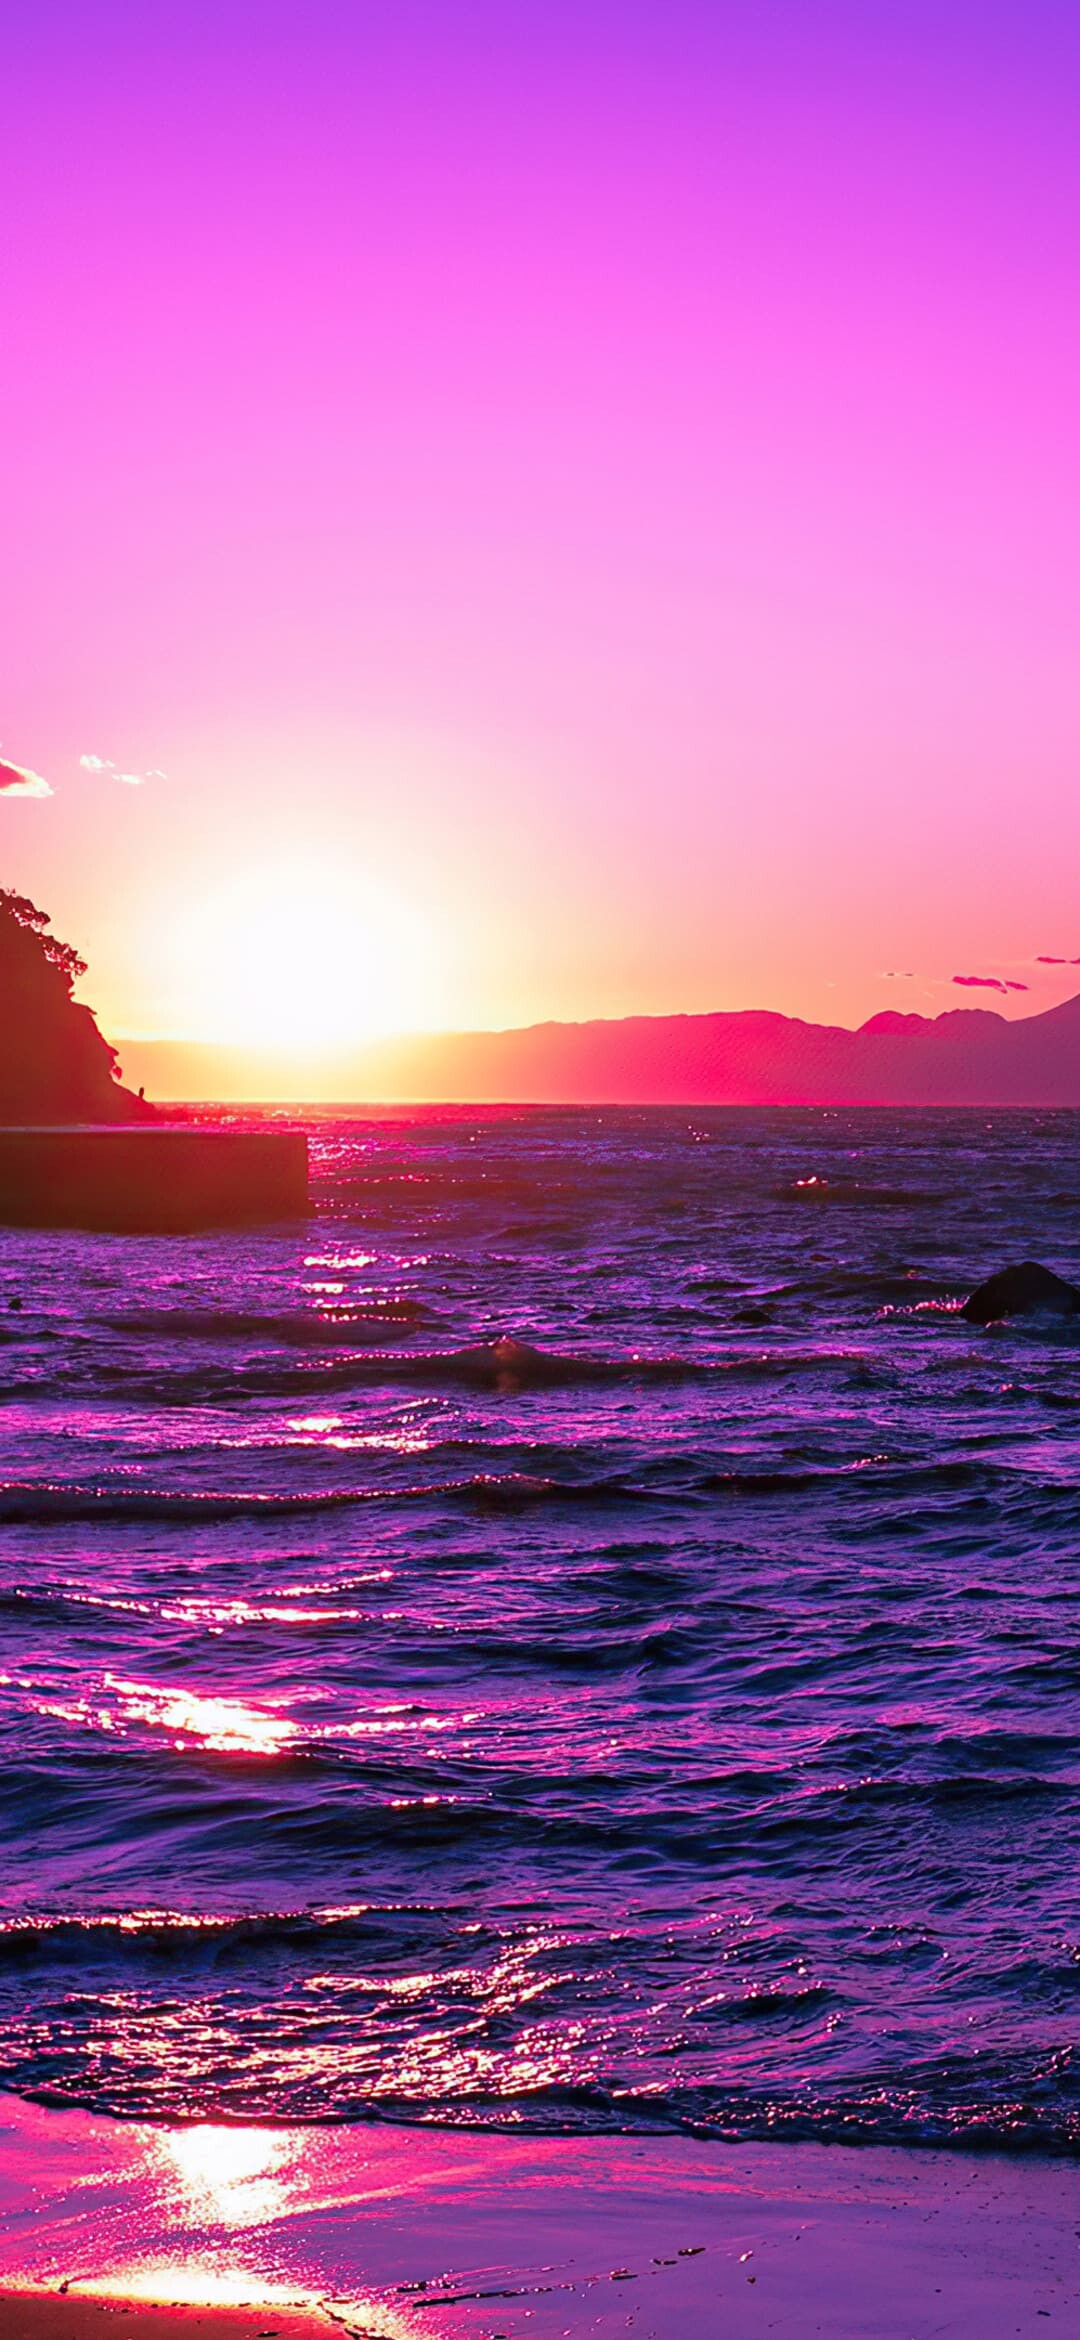 Sunset: The daily disappearance of the Sun below the horizon due to Earth's rotation, Seascape. 1080x2340 HD Wallpaper.